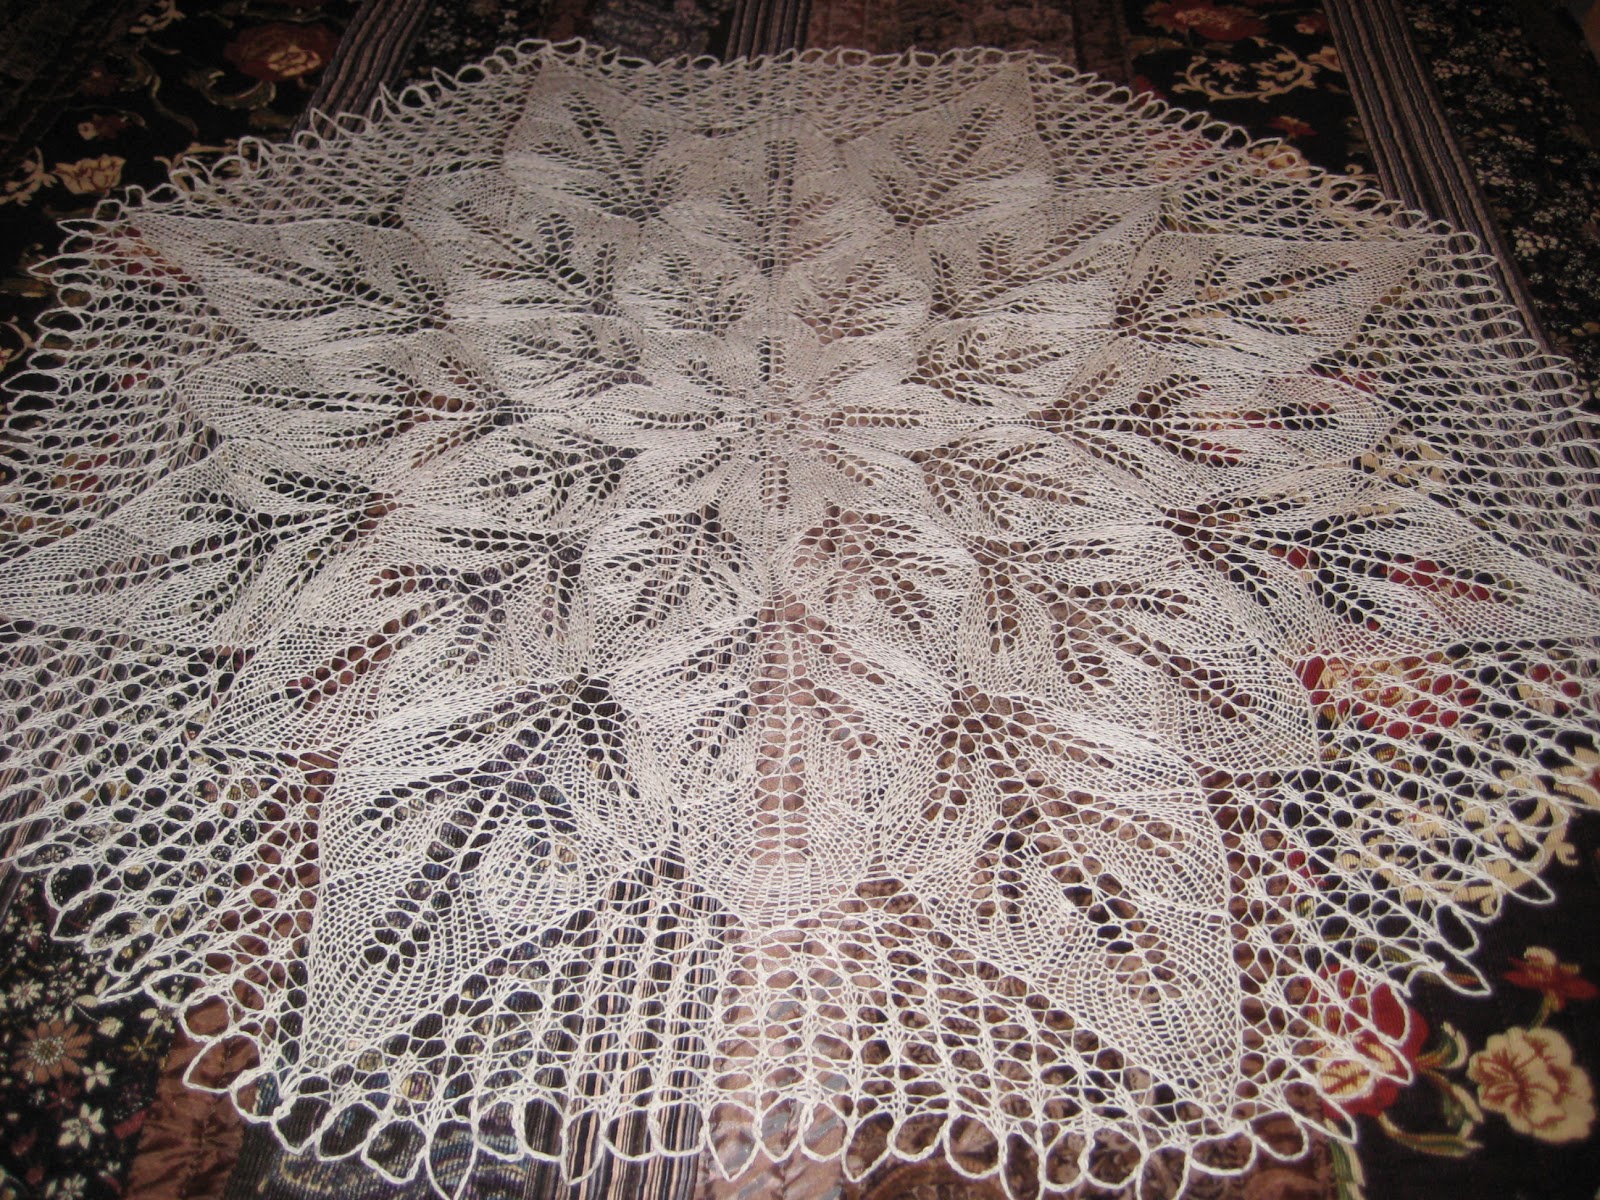 Sweet 'n' Pretty Things: More knitted lace tablecloth goodness